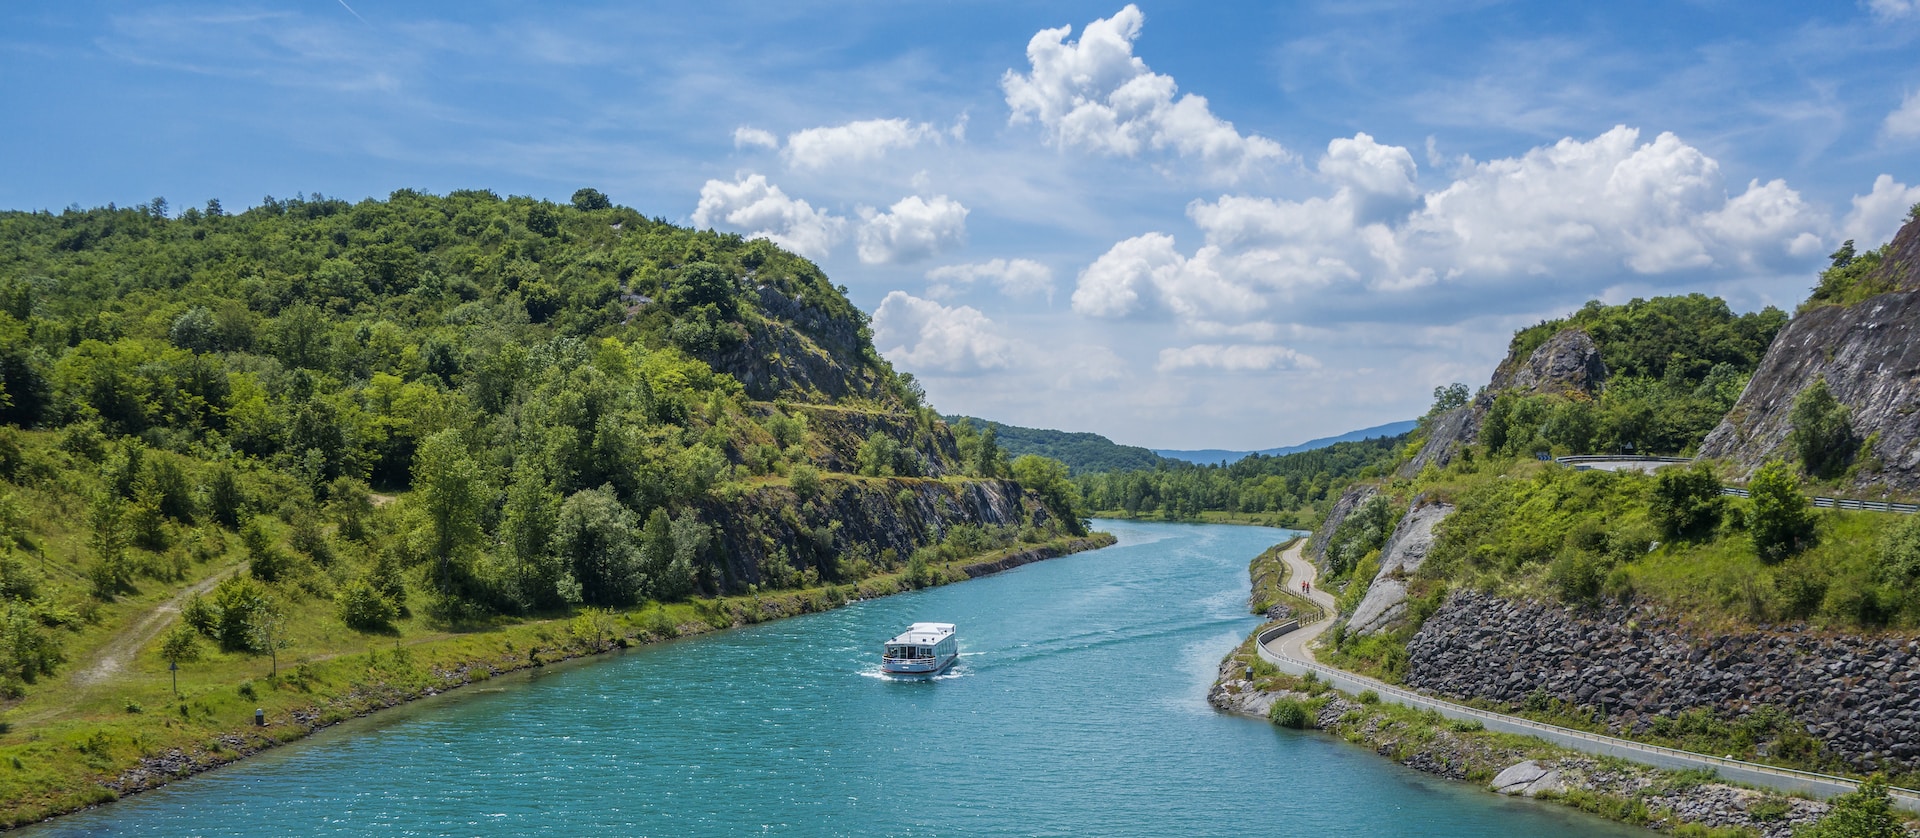 European river voyages from just $1,999!